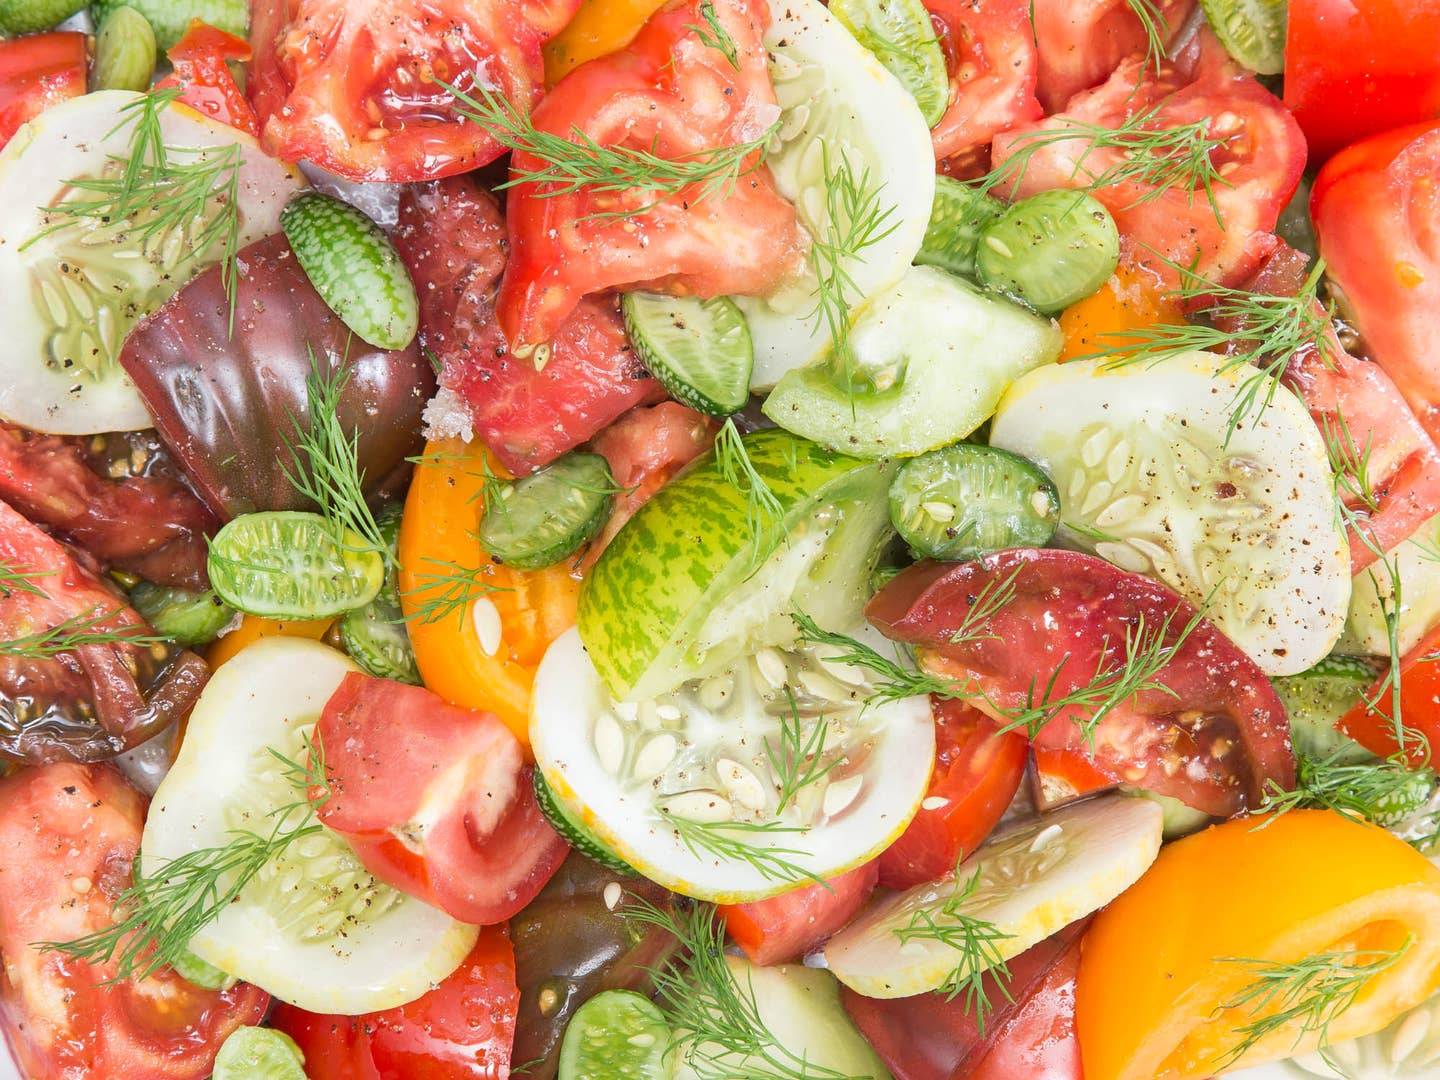 Say Goodbye to Summer with One Last Tomato Salad